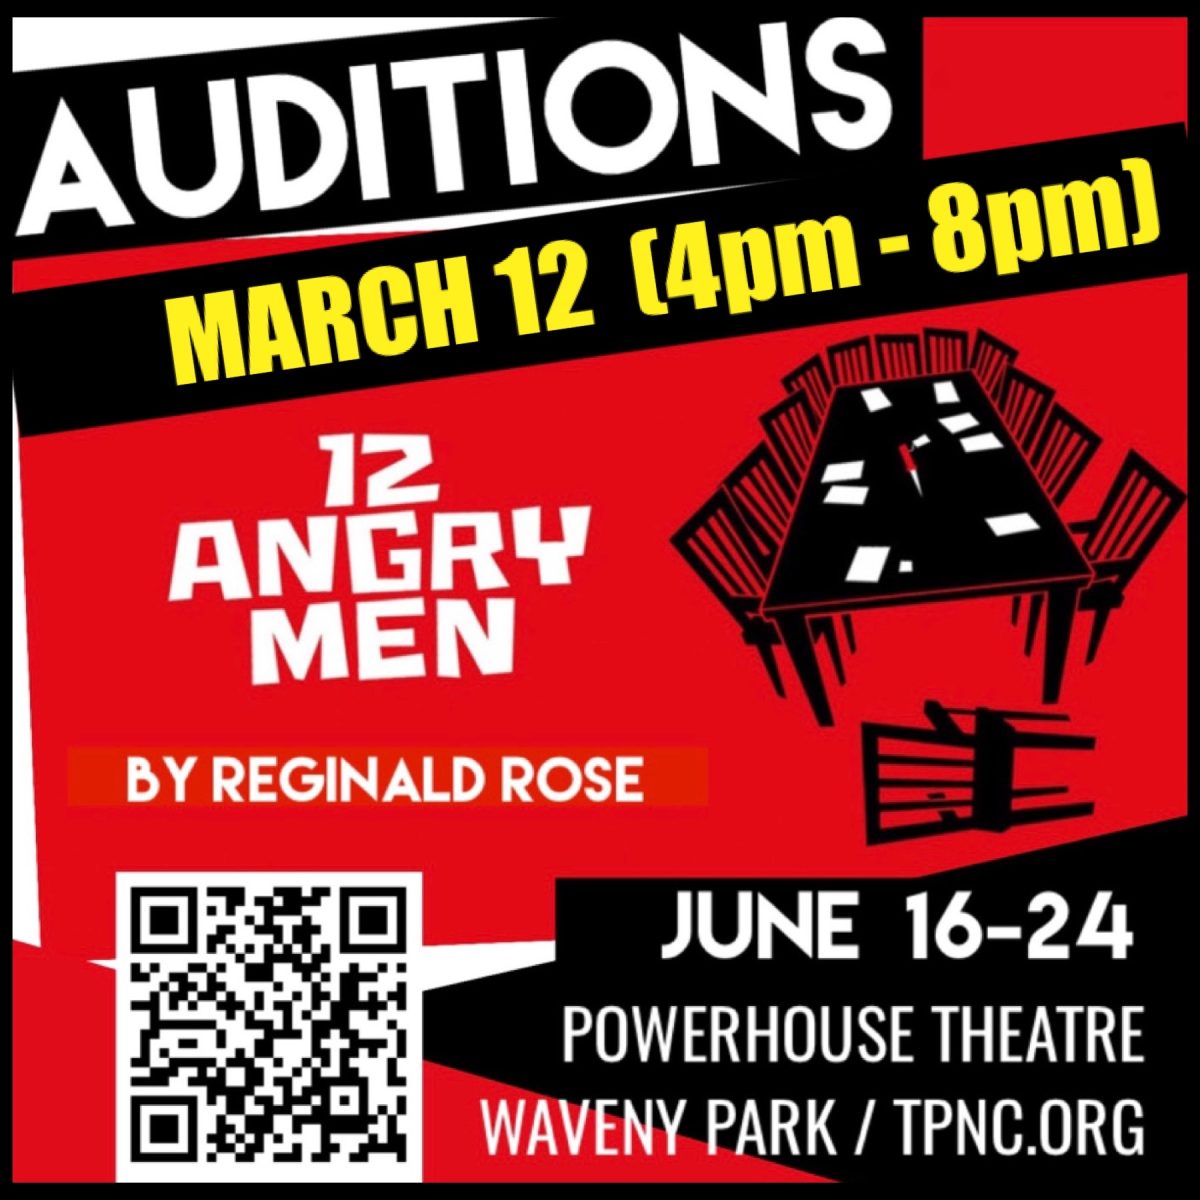 AUDITIONS for 12 ANGRY MEN